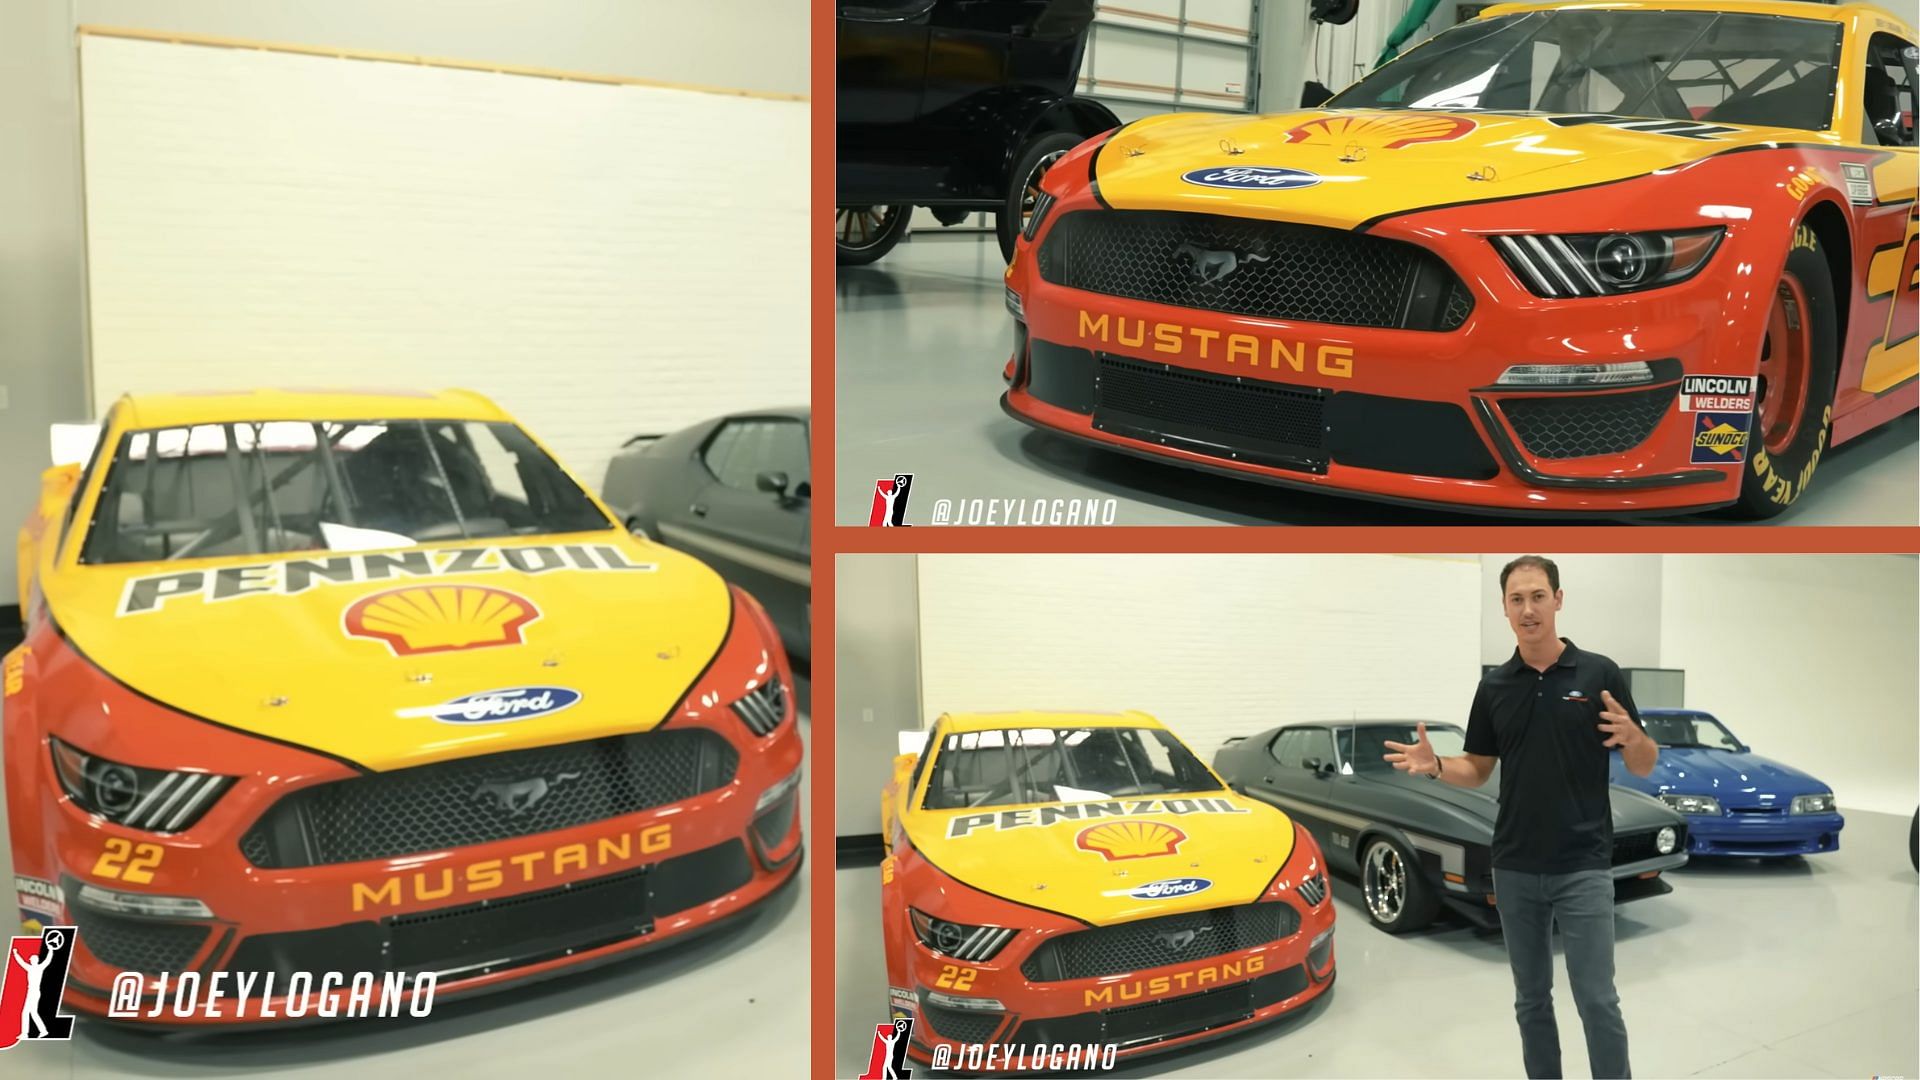 Joey Logano and his 2019 No. 22 Shell Pennzoil Ford Mustang